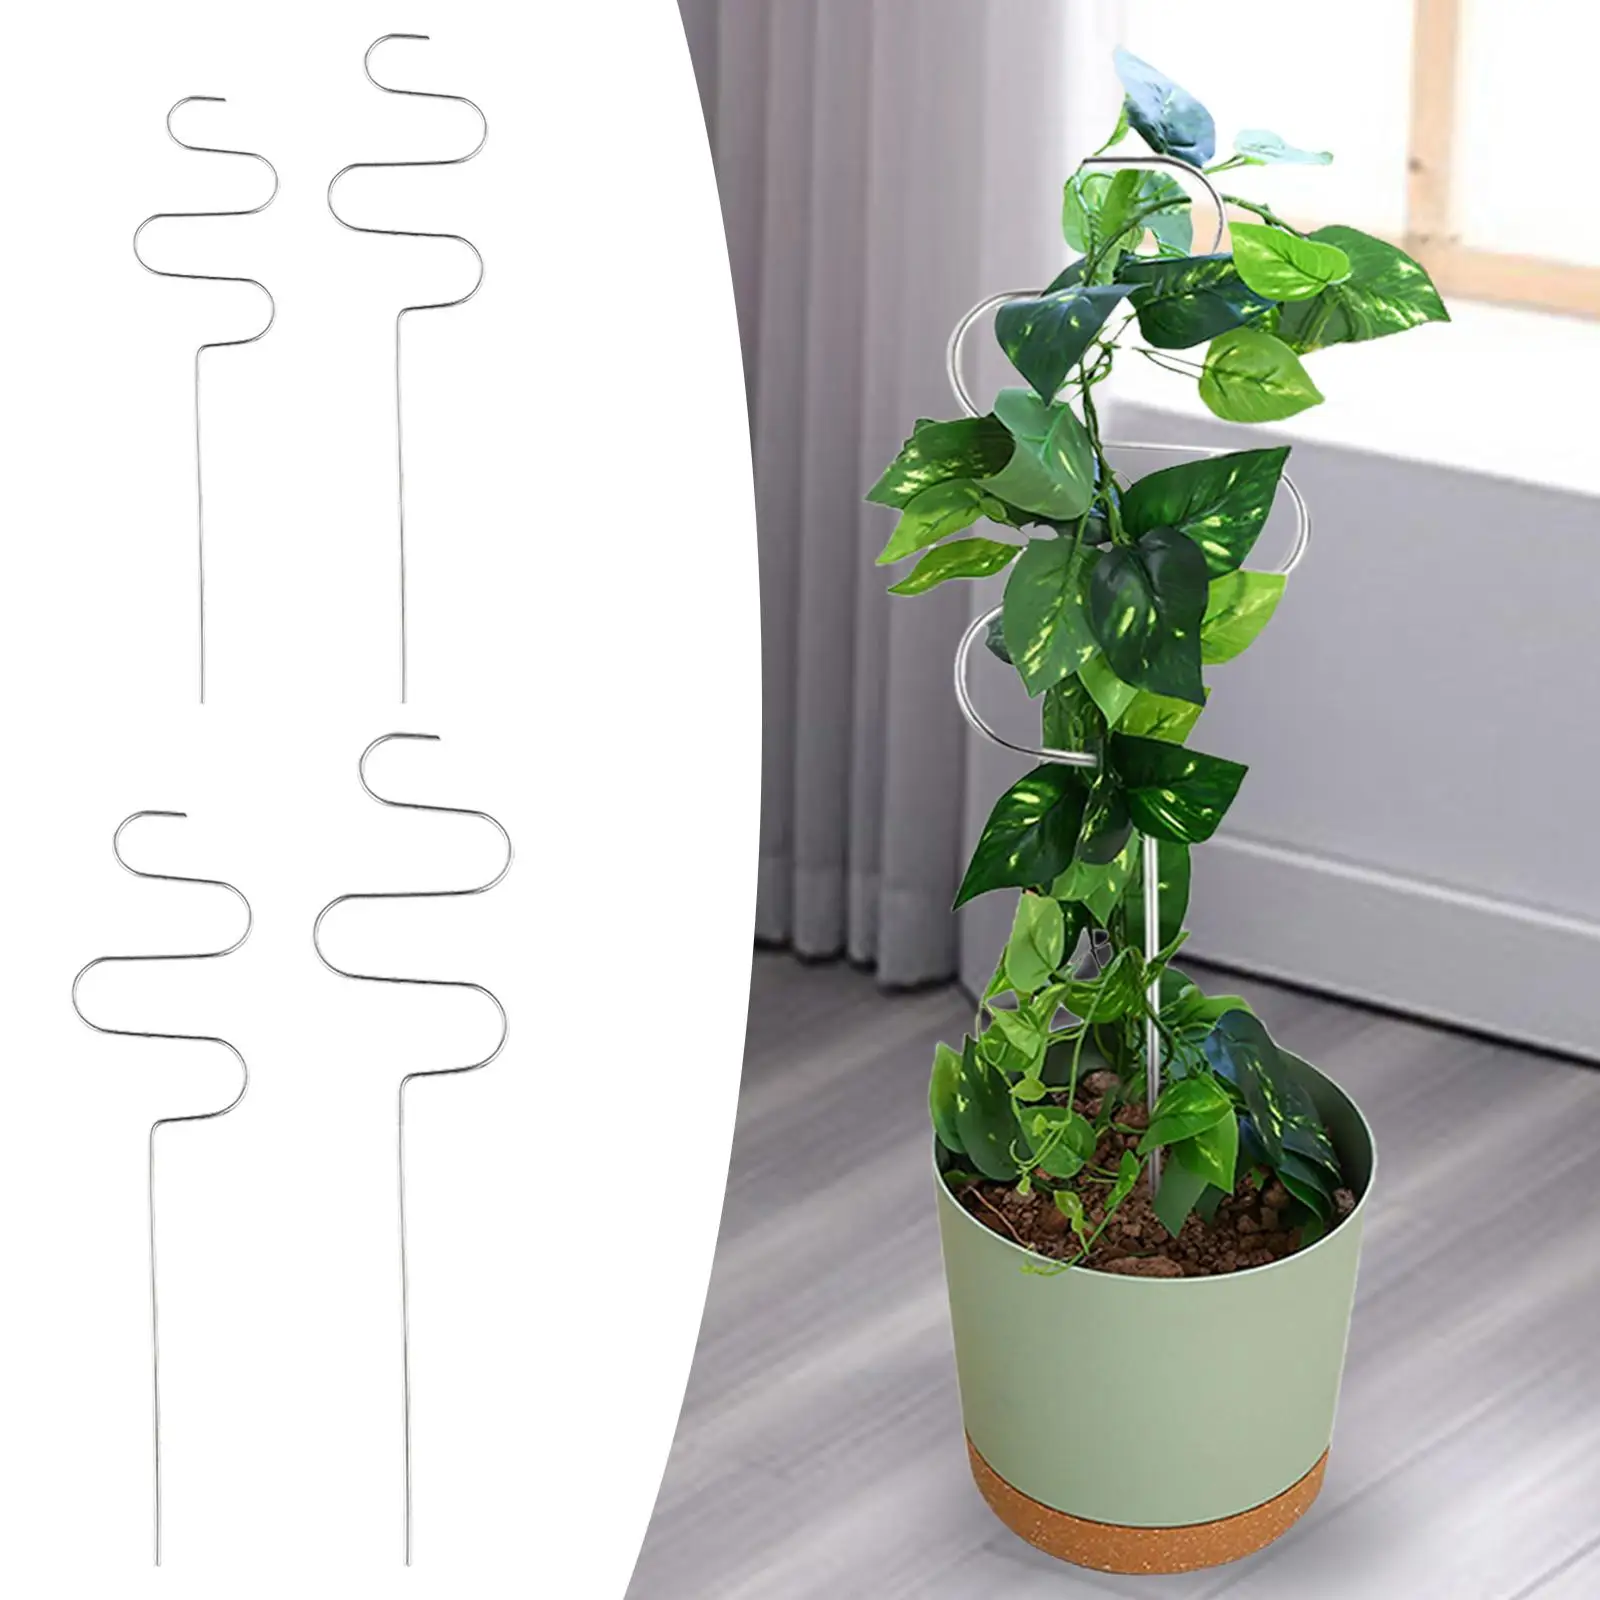 Set of 3 Decorative Plant Stake Flowerpot Decor Sturdy Long Lasting Metal Plant Trellis Plant Support Structures for Vegetable